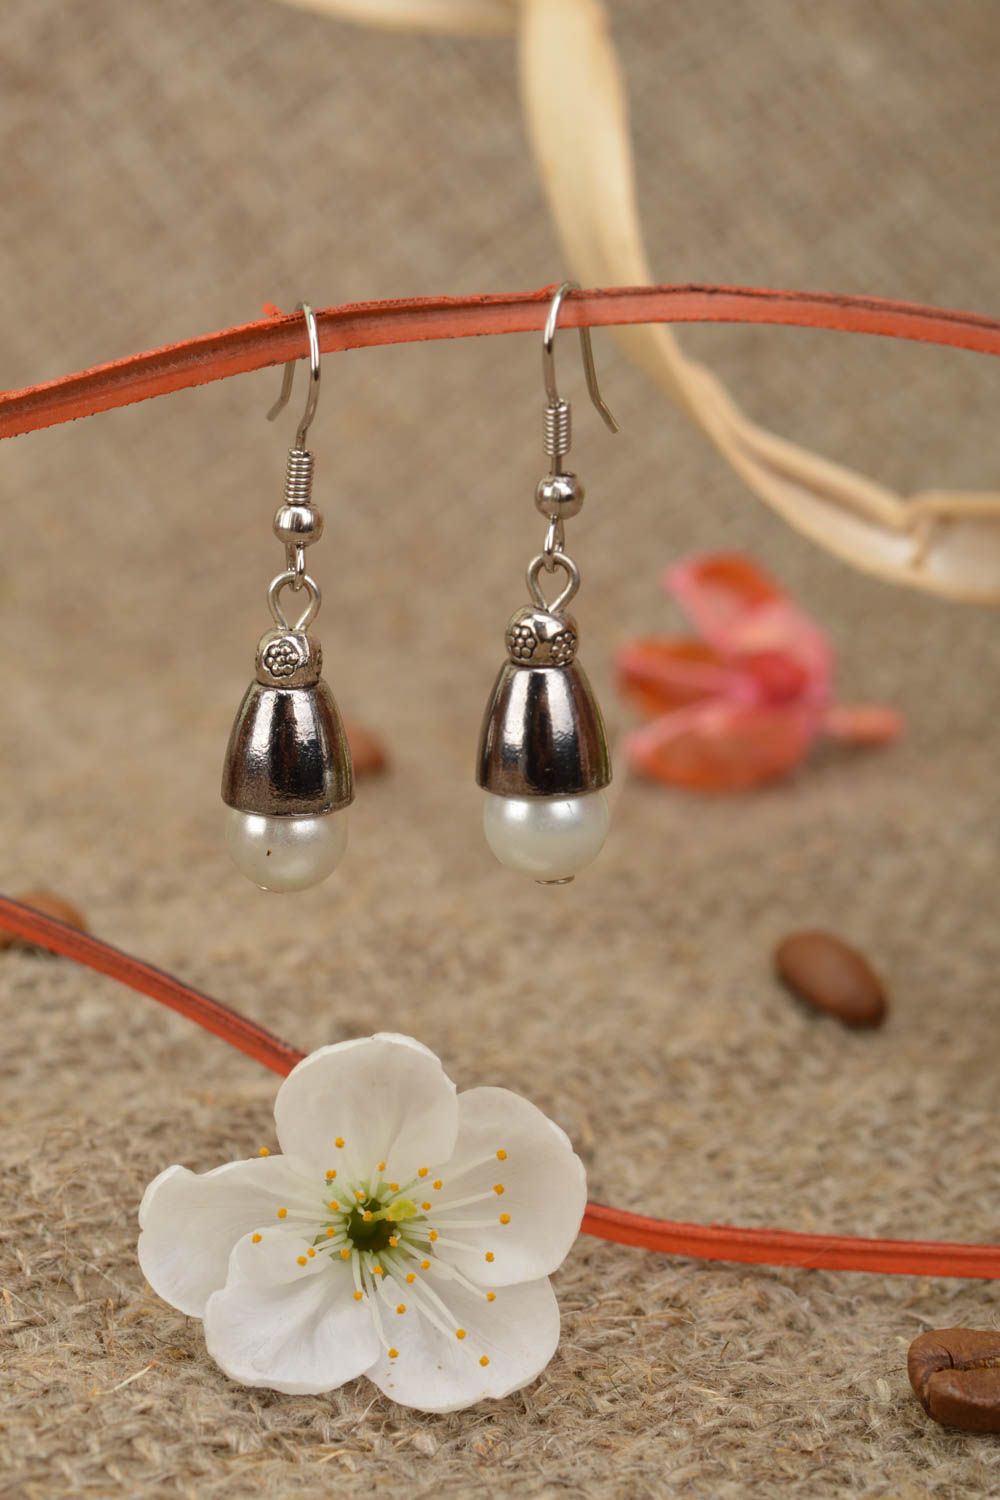 Handmade designer cute unusual earrings with charms and beads like pearls photo 1